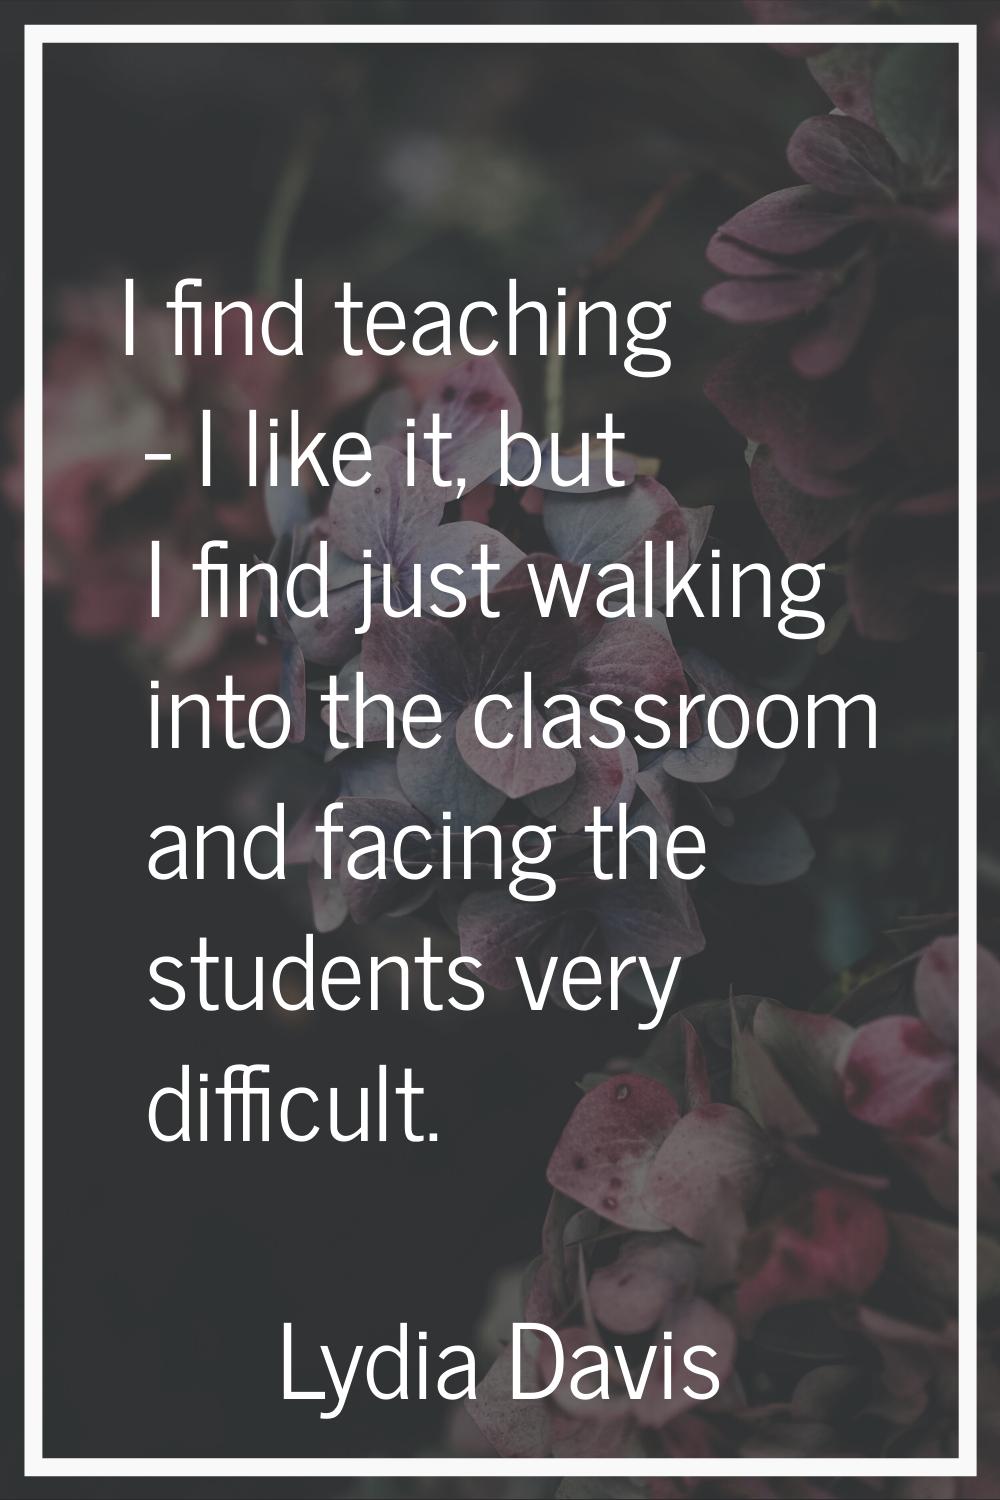 I find teaching - I like it, but I find just walking into the classroom and facing the students ver